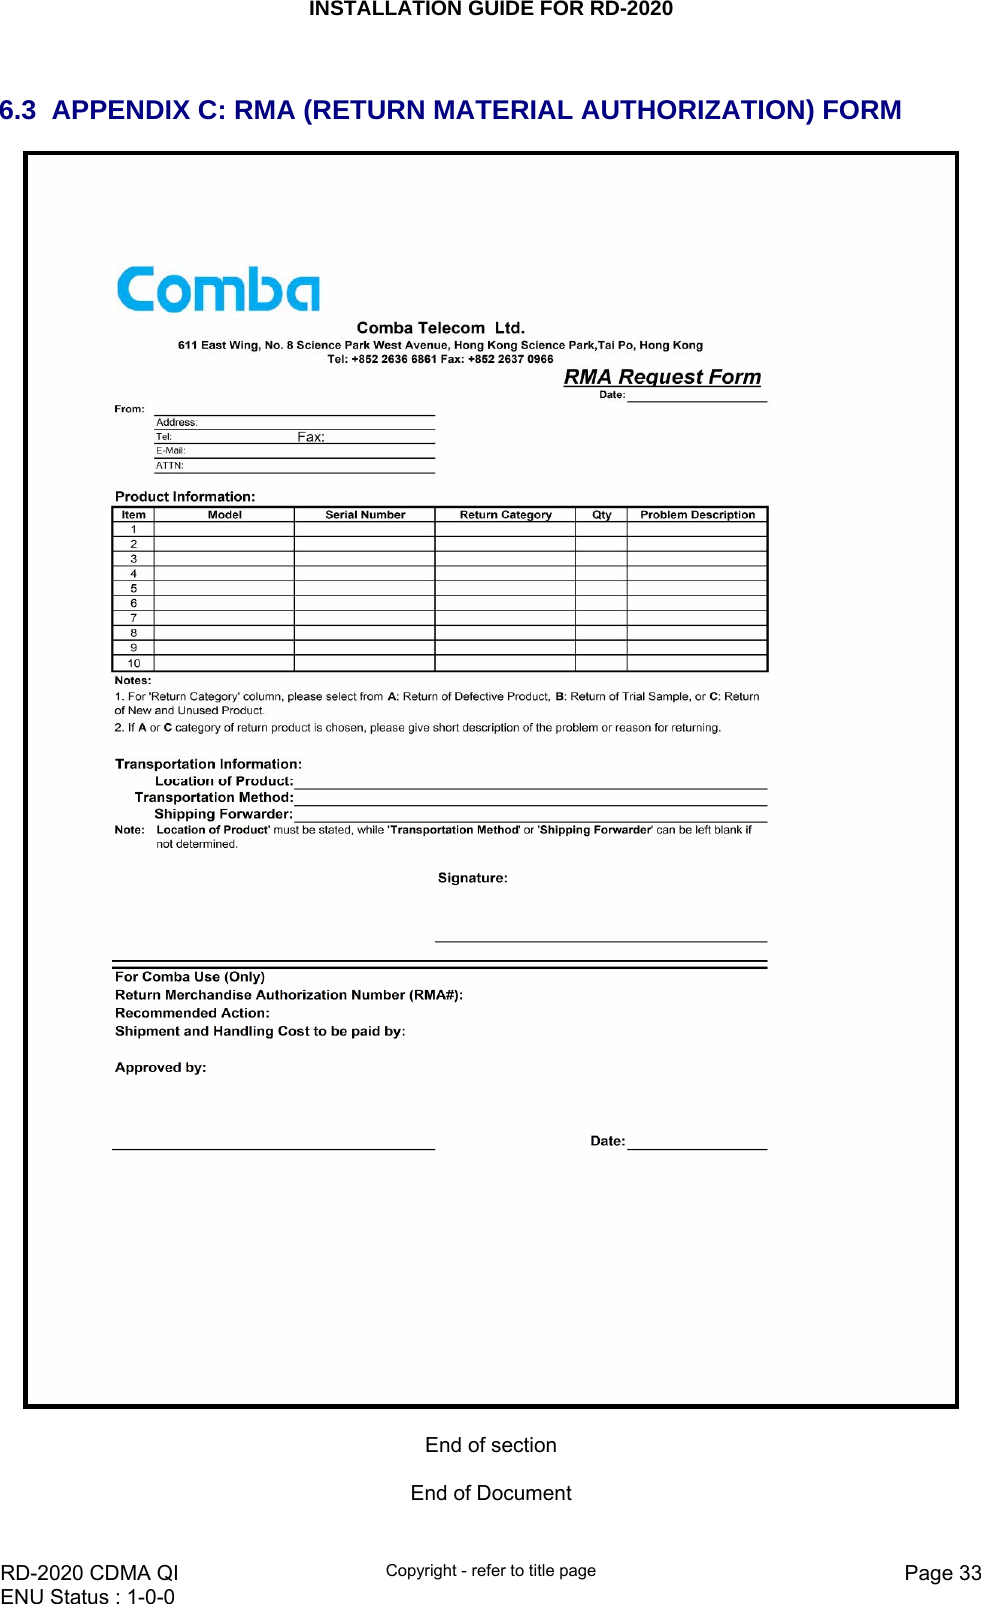 INSTALLATION GUIDE FOR RD-2020    RD-2020 CDMA QI  Copyright - refer to title page  Page 33ENU Status : 1-0-0     6.3  APPENDIX C: RMA (RETURN MATERIAL AUTHORIZATION) FORM   End of section  End of Document 